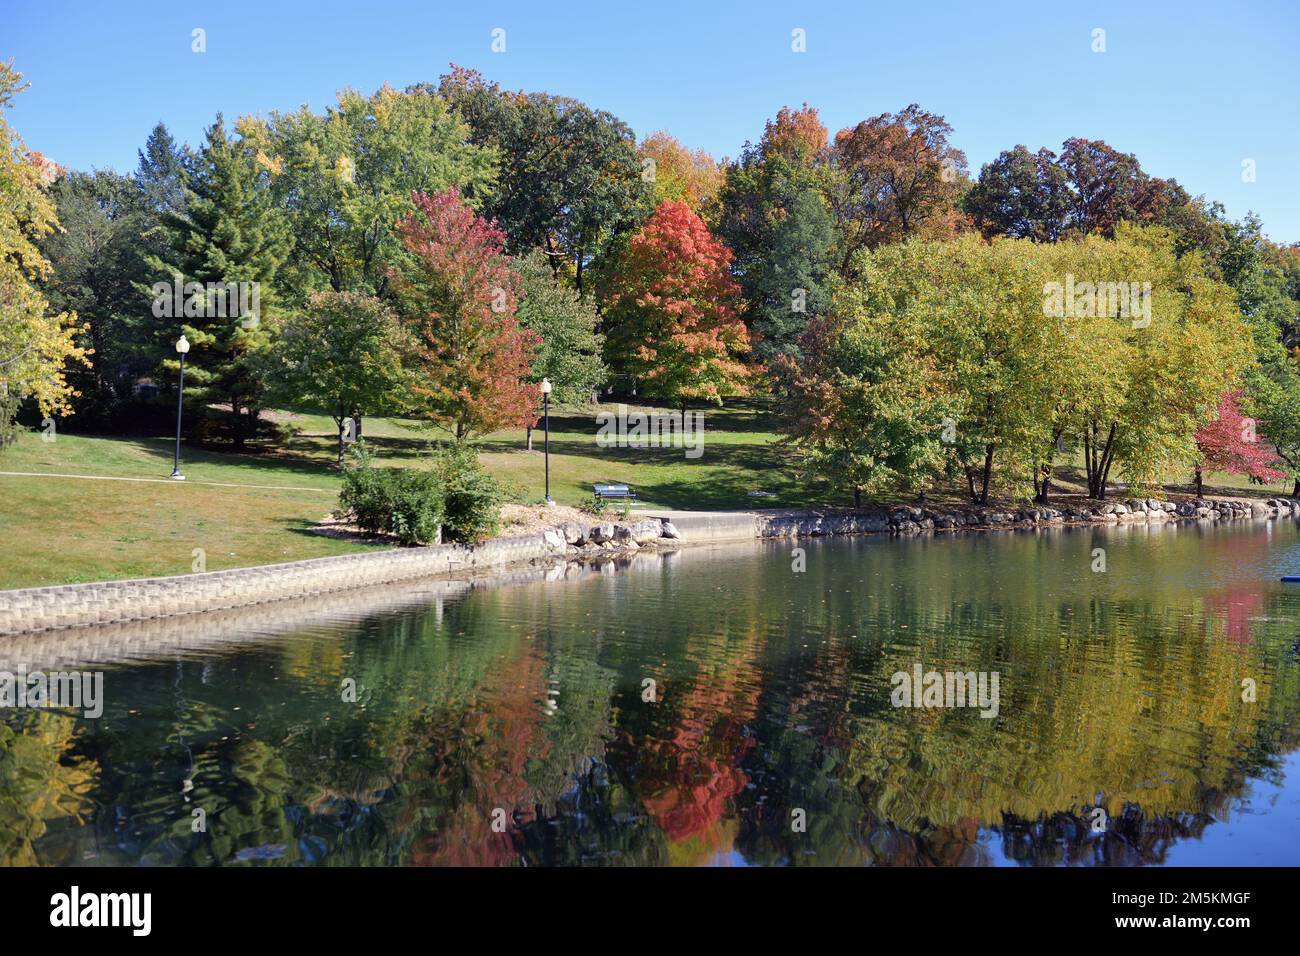 Elgin, Illinois, USA. The beauty and color of the autumn season in evidence around a lake at a park in northeastern Illinois. Stock Photo